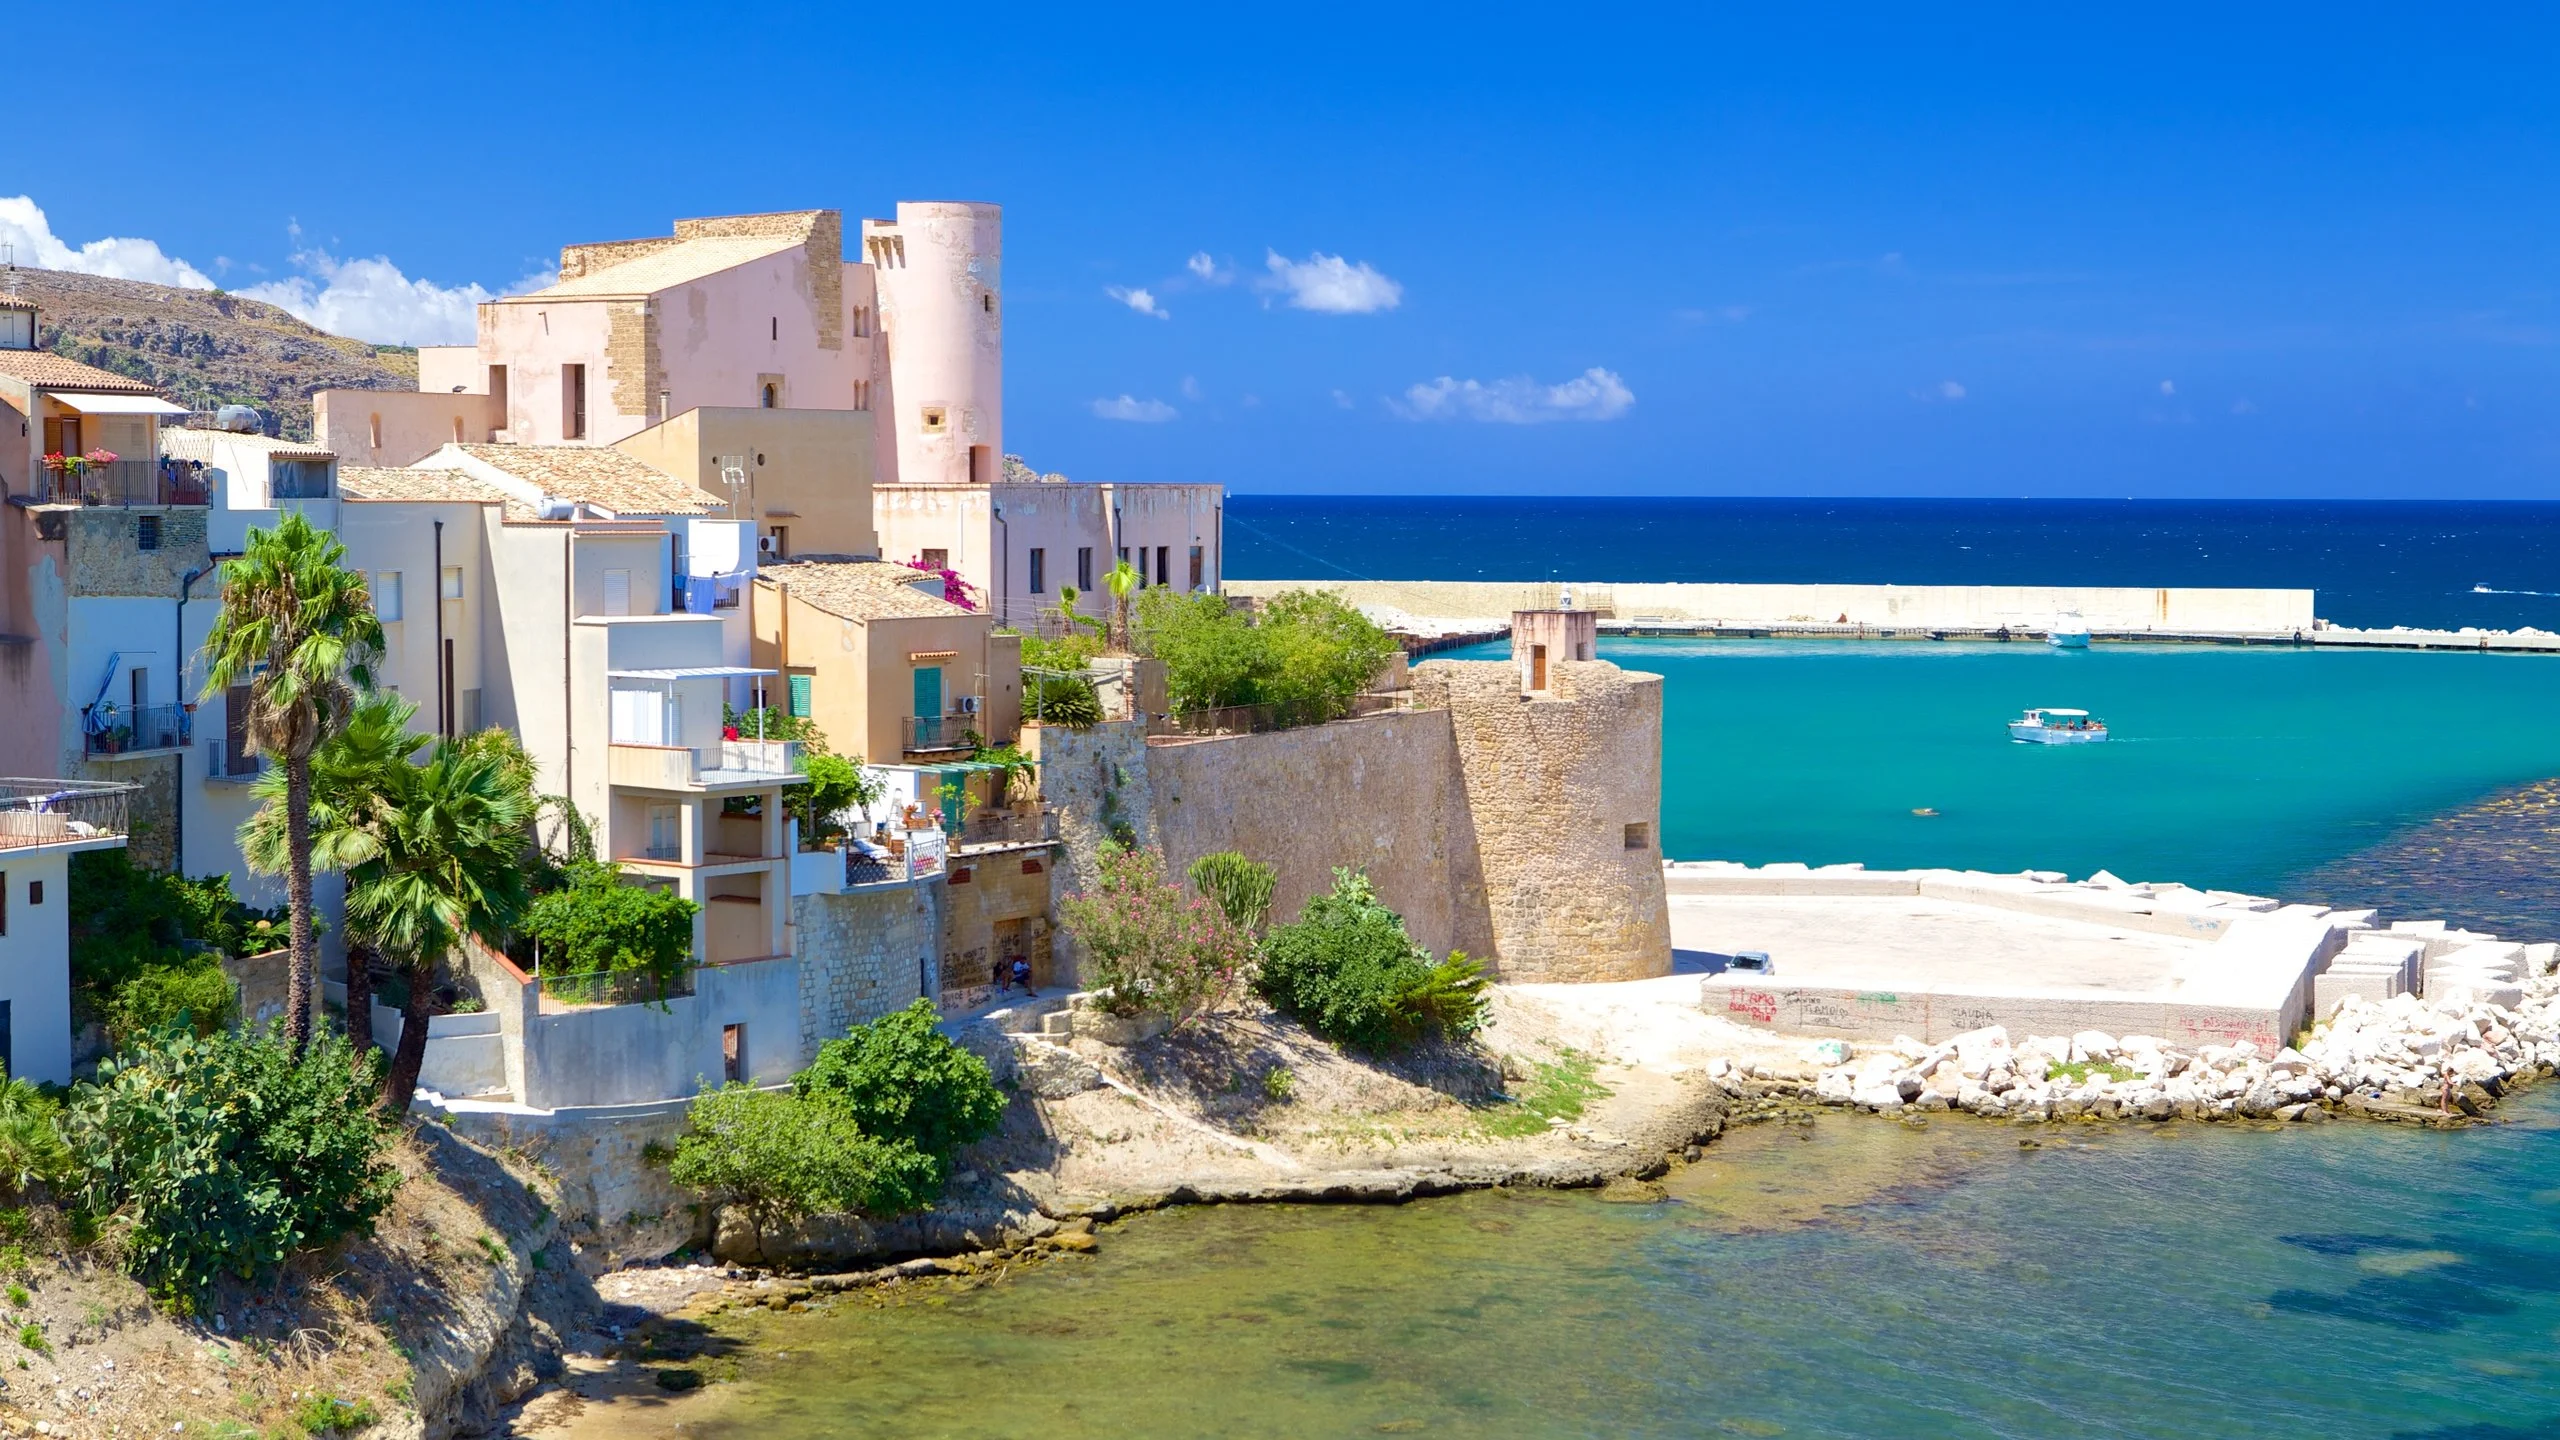 The 12 Most Astonishing Beaches In Sicily That Will Leave You In Awe